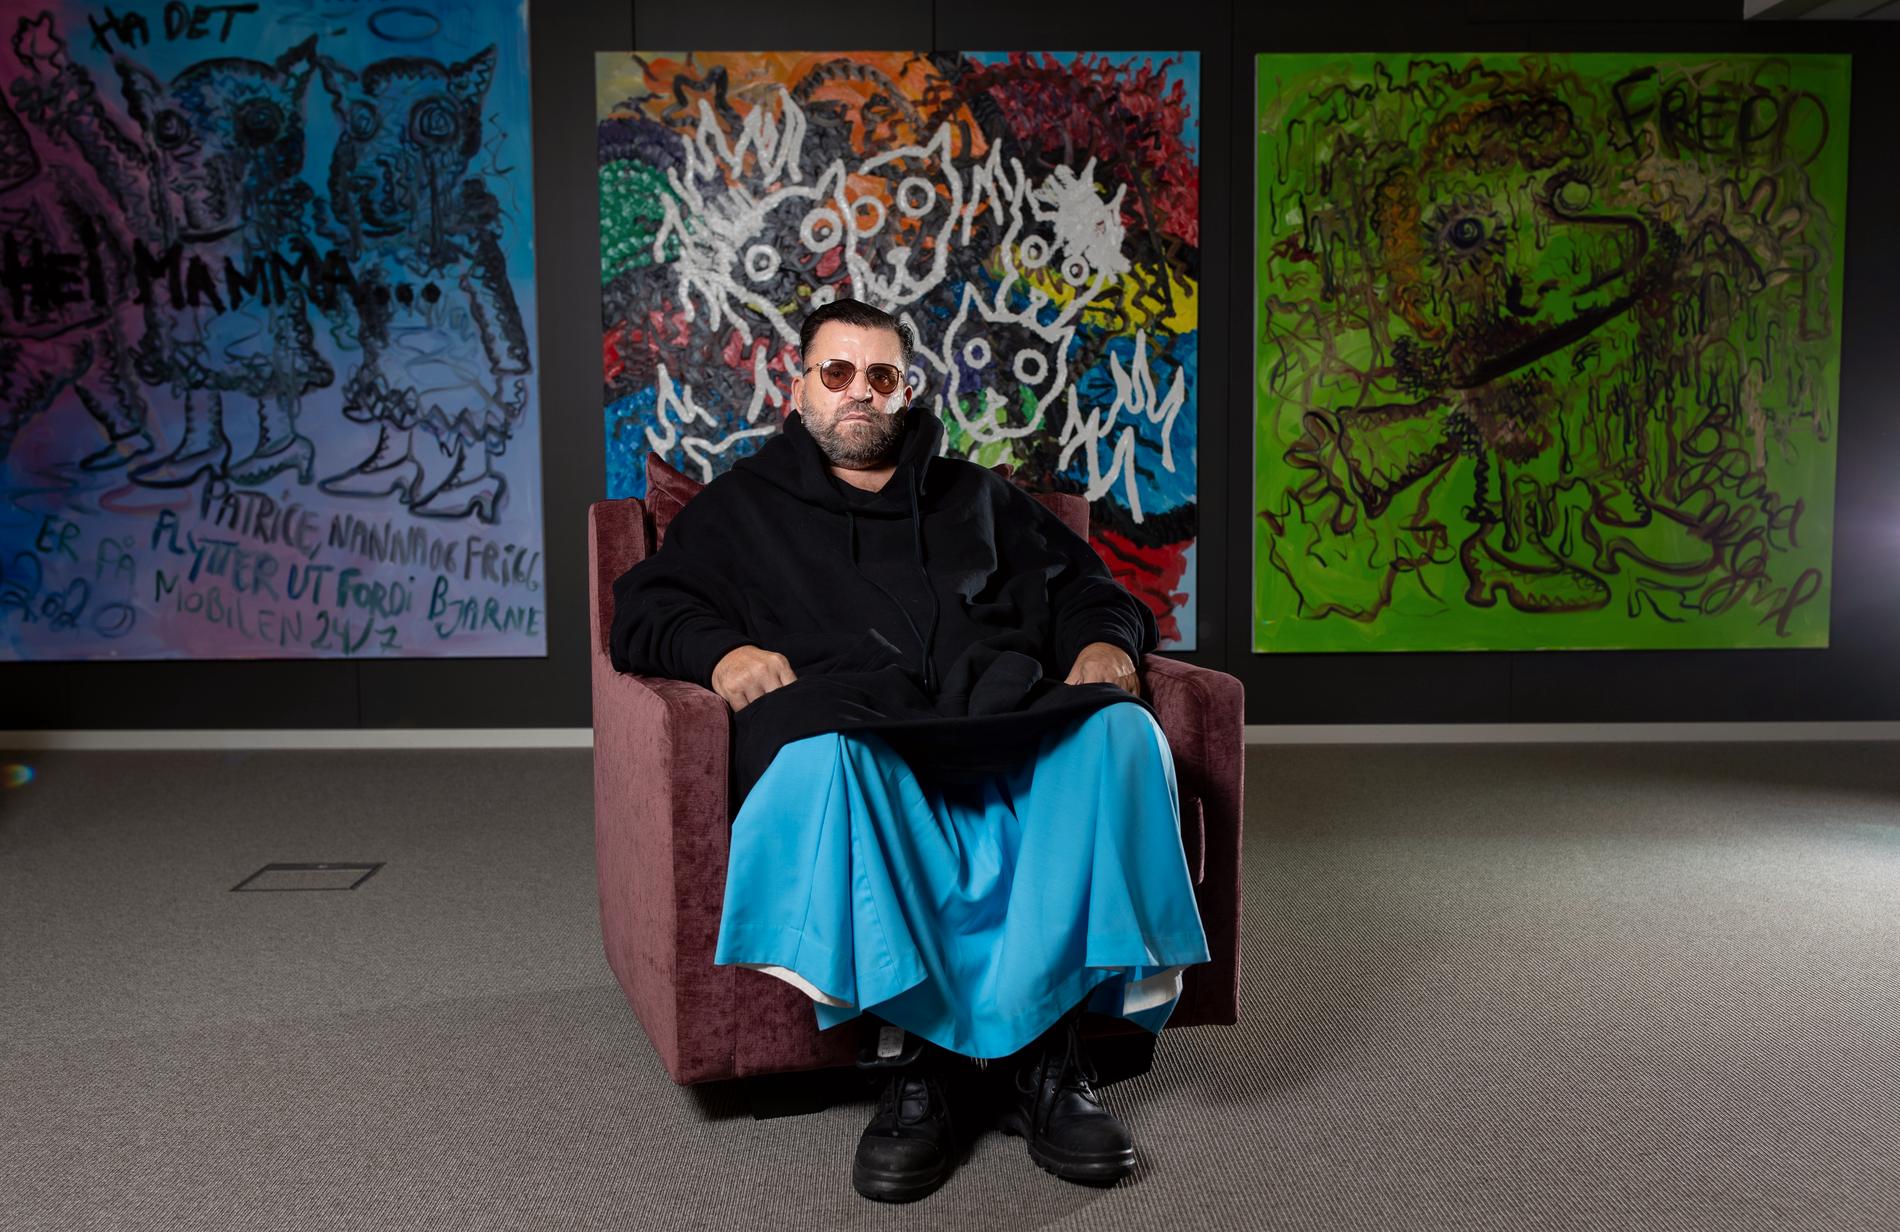 Bjarne Melgaard Sold The Art Of Cryptography For Over 10 Million - E24